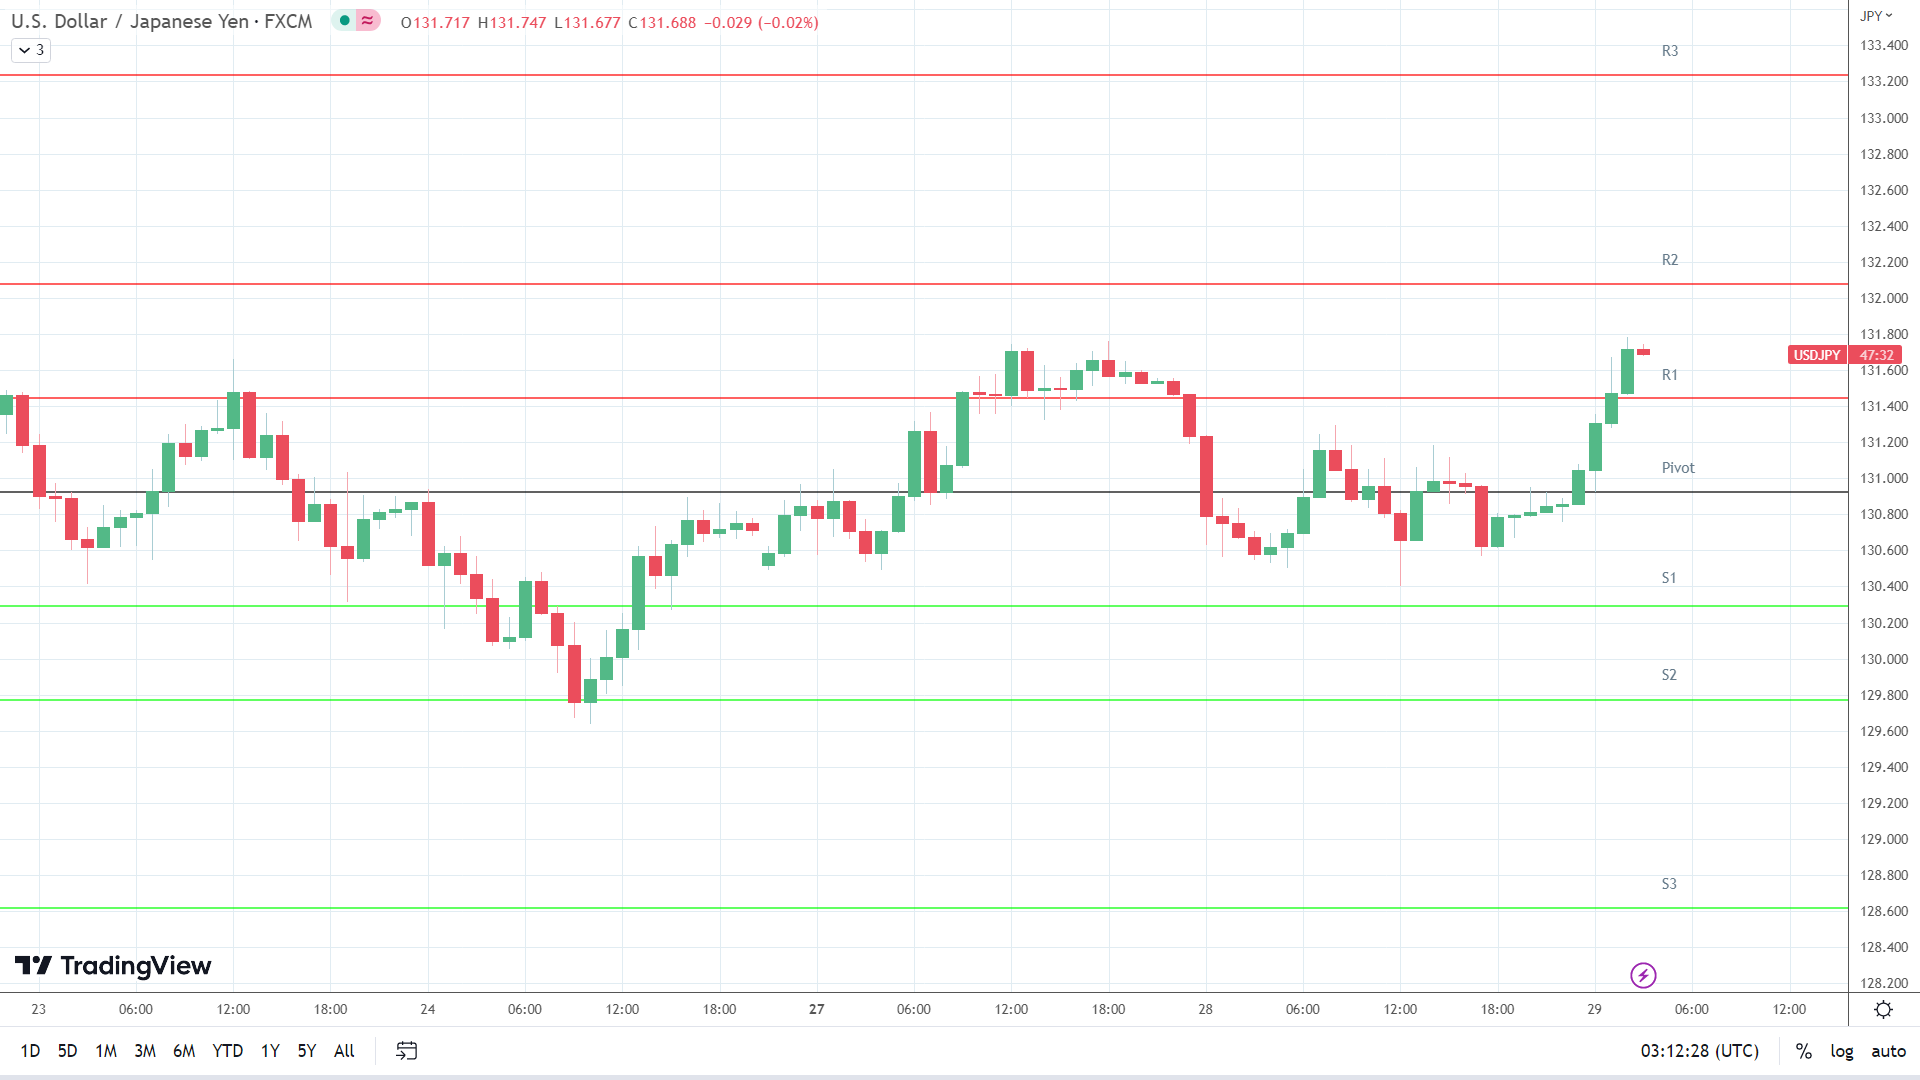 USD/JPY resistance levels in play.